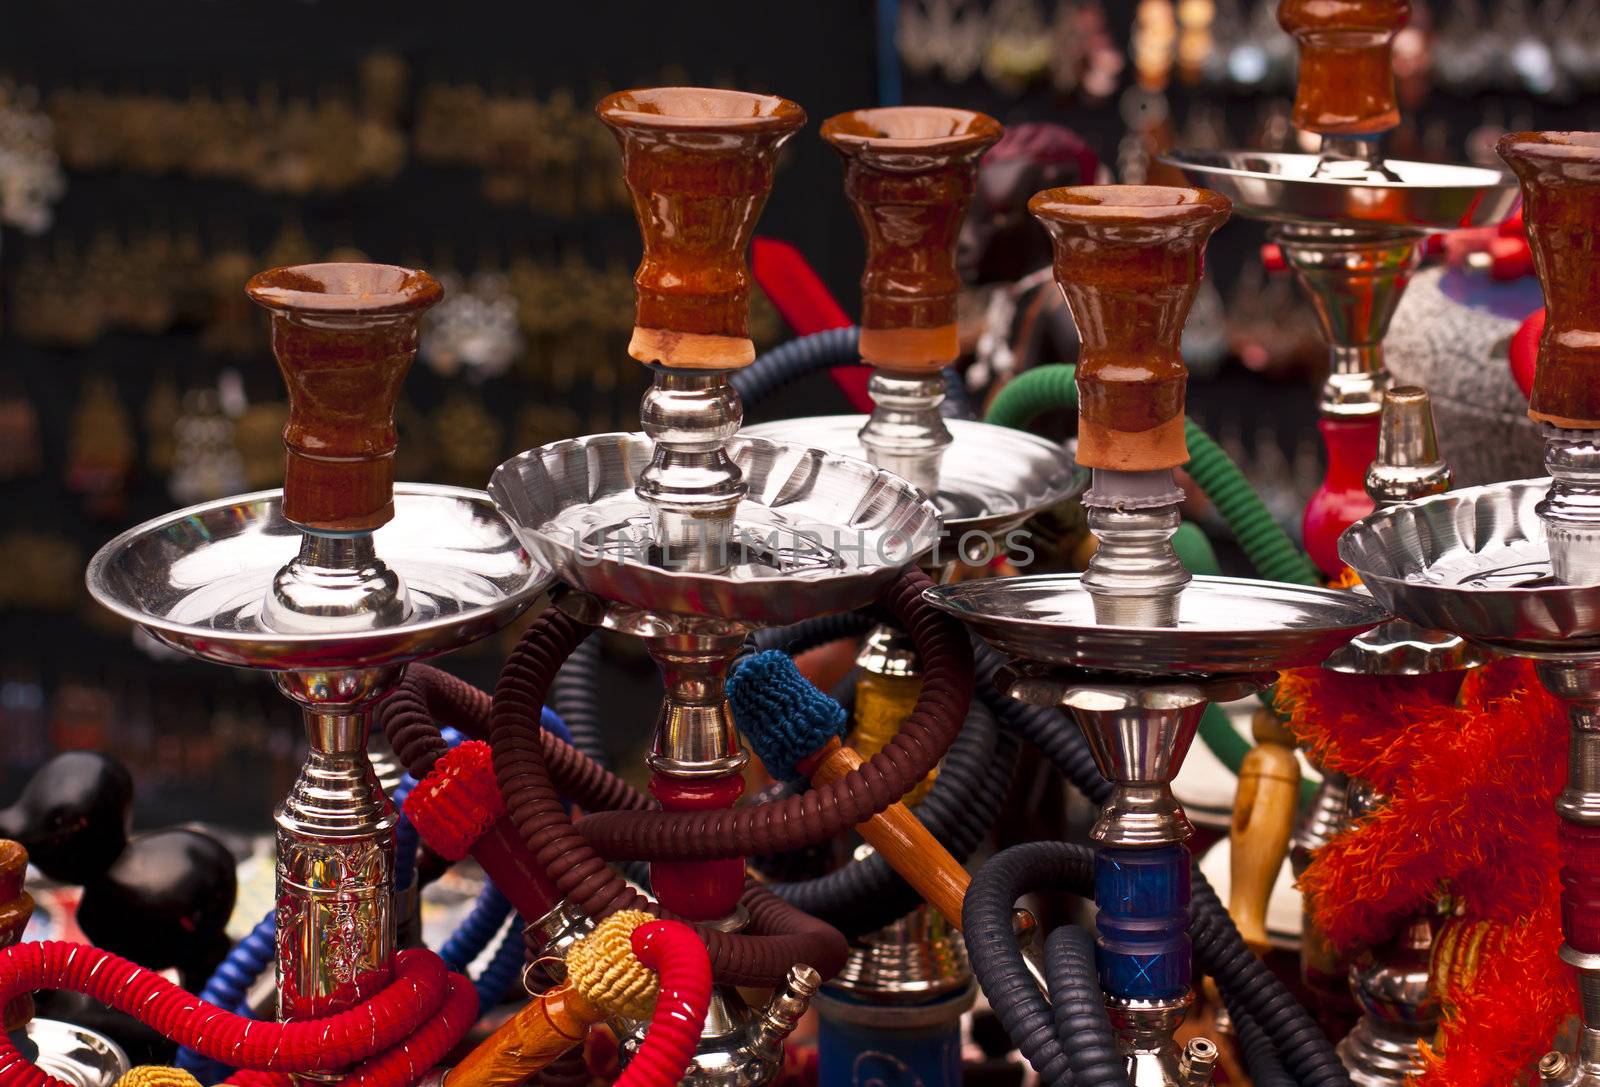 Water Pipes - Egyptians call it Shisha, Lebanese refer to it as Nargile, in English, it is Hookah.